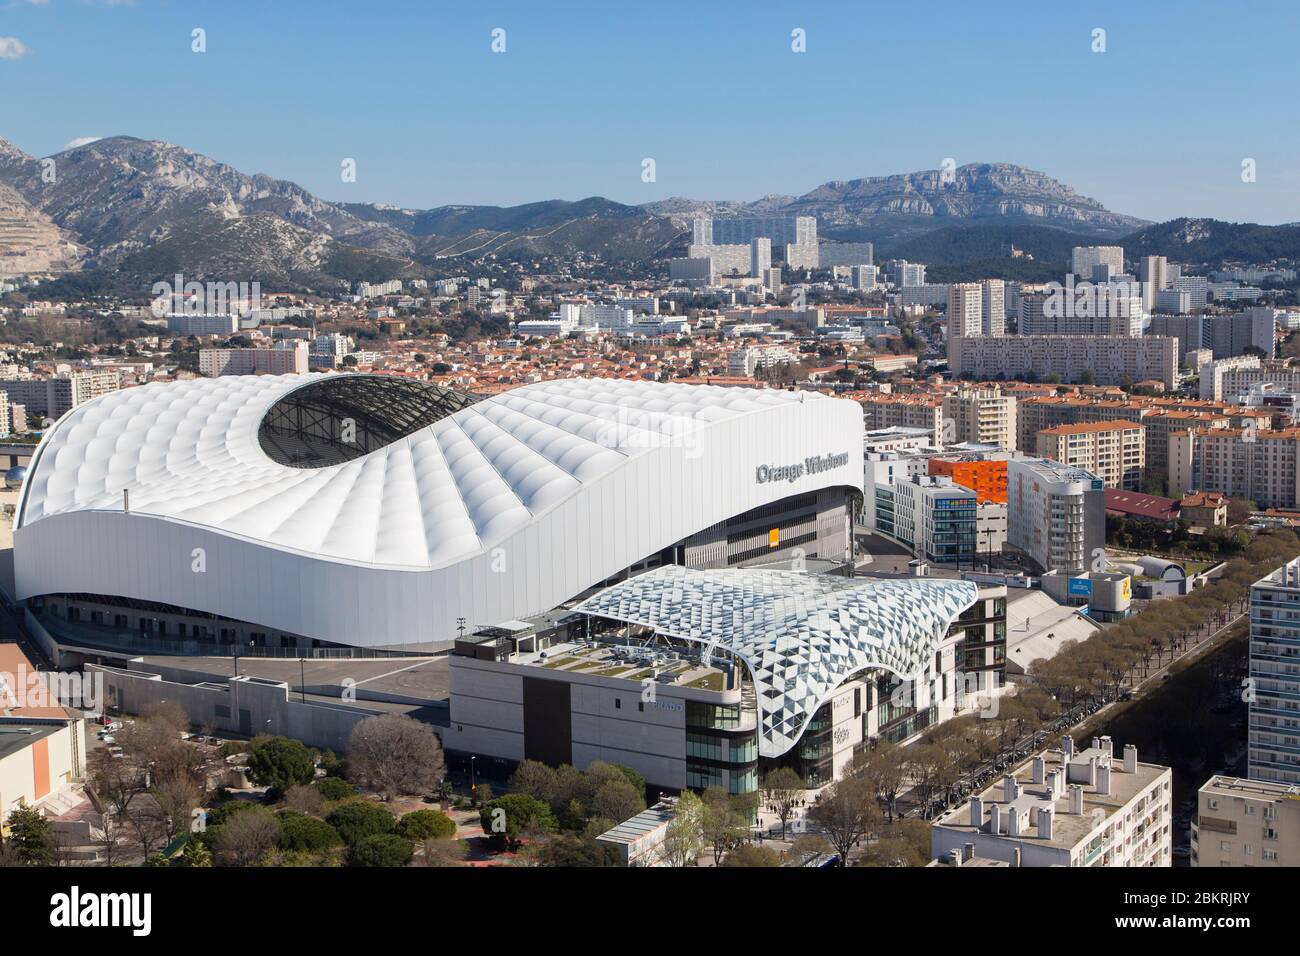 France, Bouches du Rhone, Marseille, Stade orange velodrome and Le Prado,  high end shopping center, designed as a merchant on 4 levels with a glass  canopy by the architectural firms Benoy and